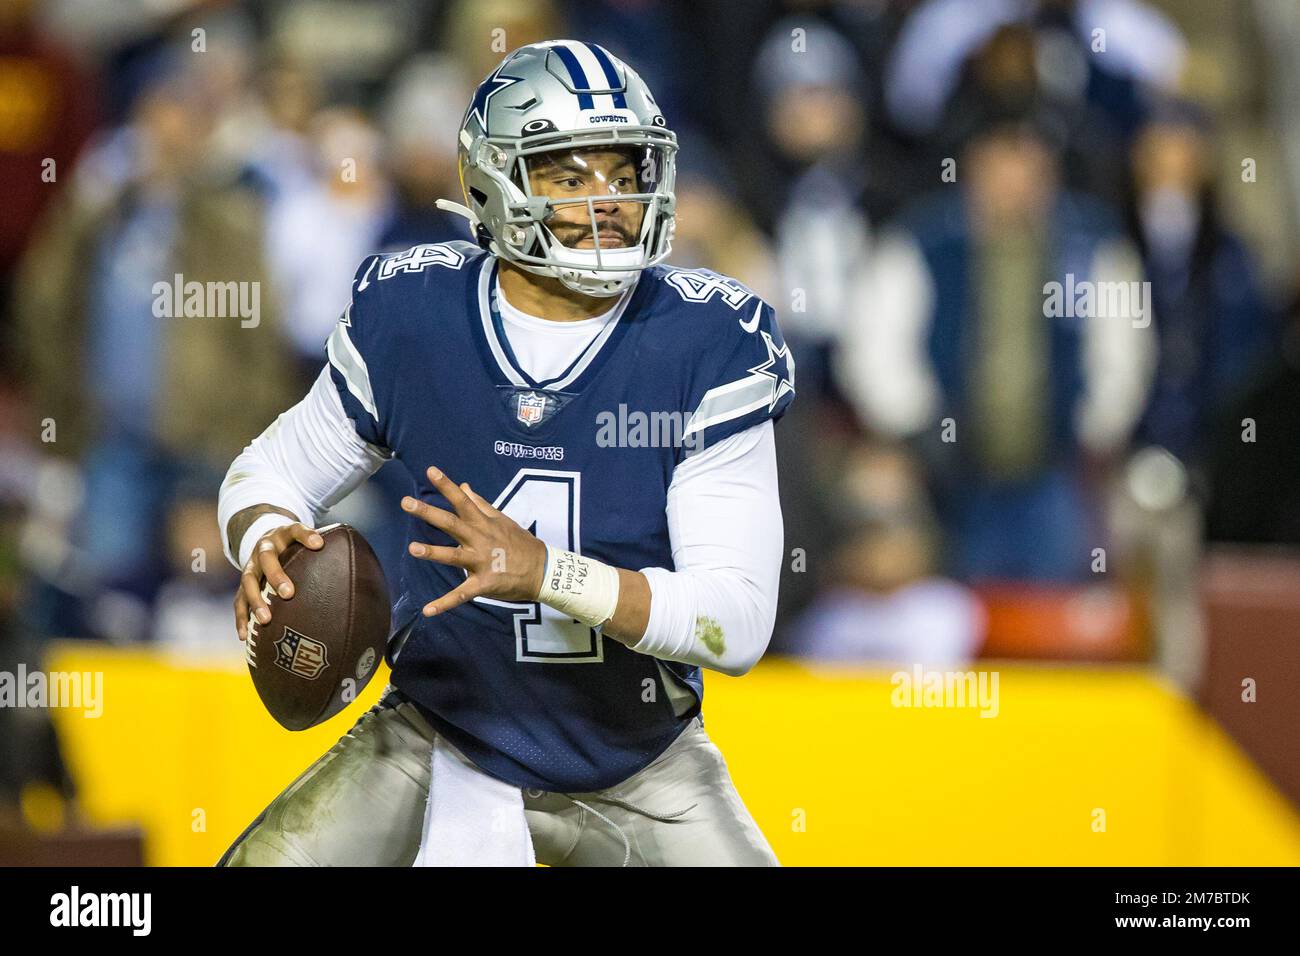 January 8, 2023 : Dallas Cowboys quarterback Dak Prescott (4) drops back to  pass during the game against the Washington Commanders in Landover, MD.  Photographer: Cory Royster (Credit Image: Â© Cory Royster/Cal